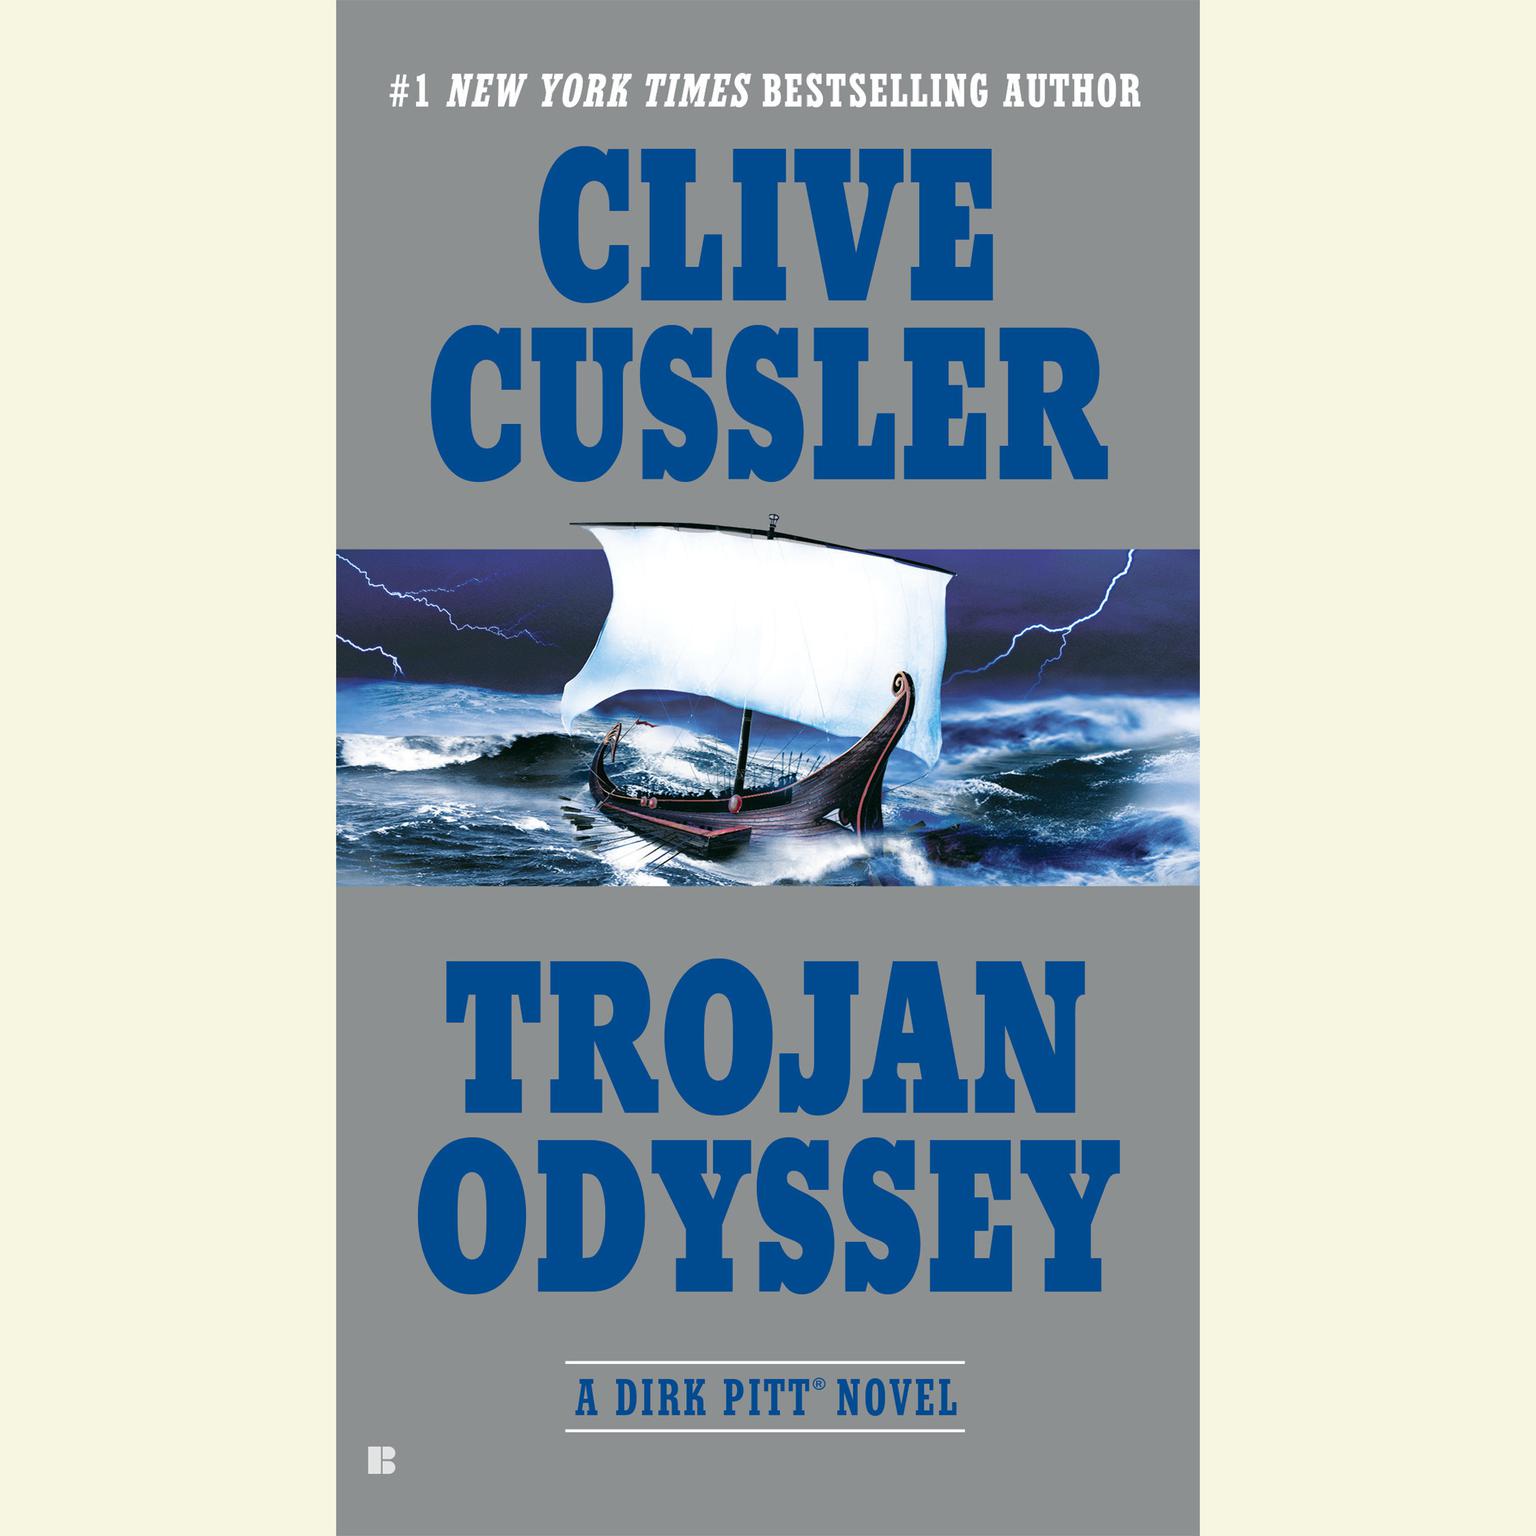 Trojan Odyssey Audiobook, by Clive Cussler